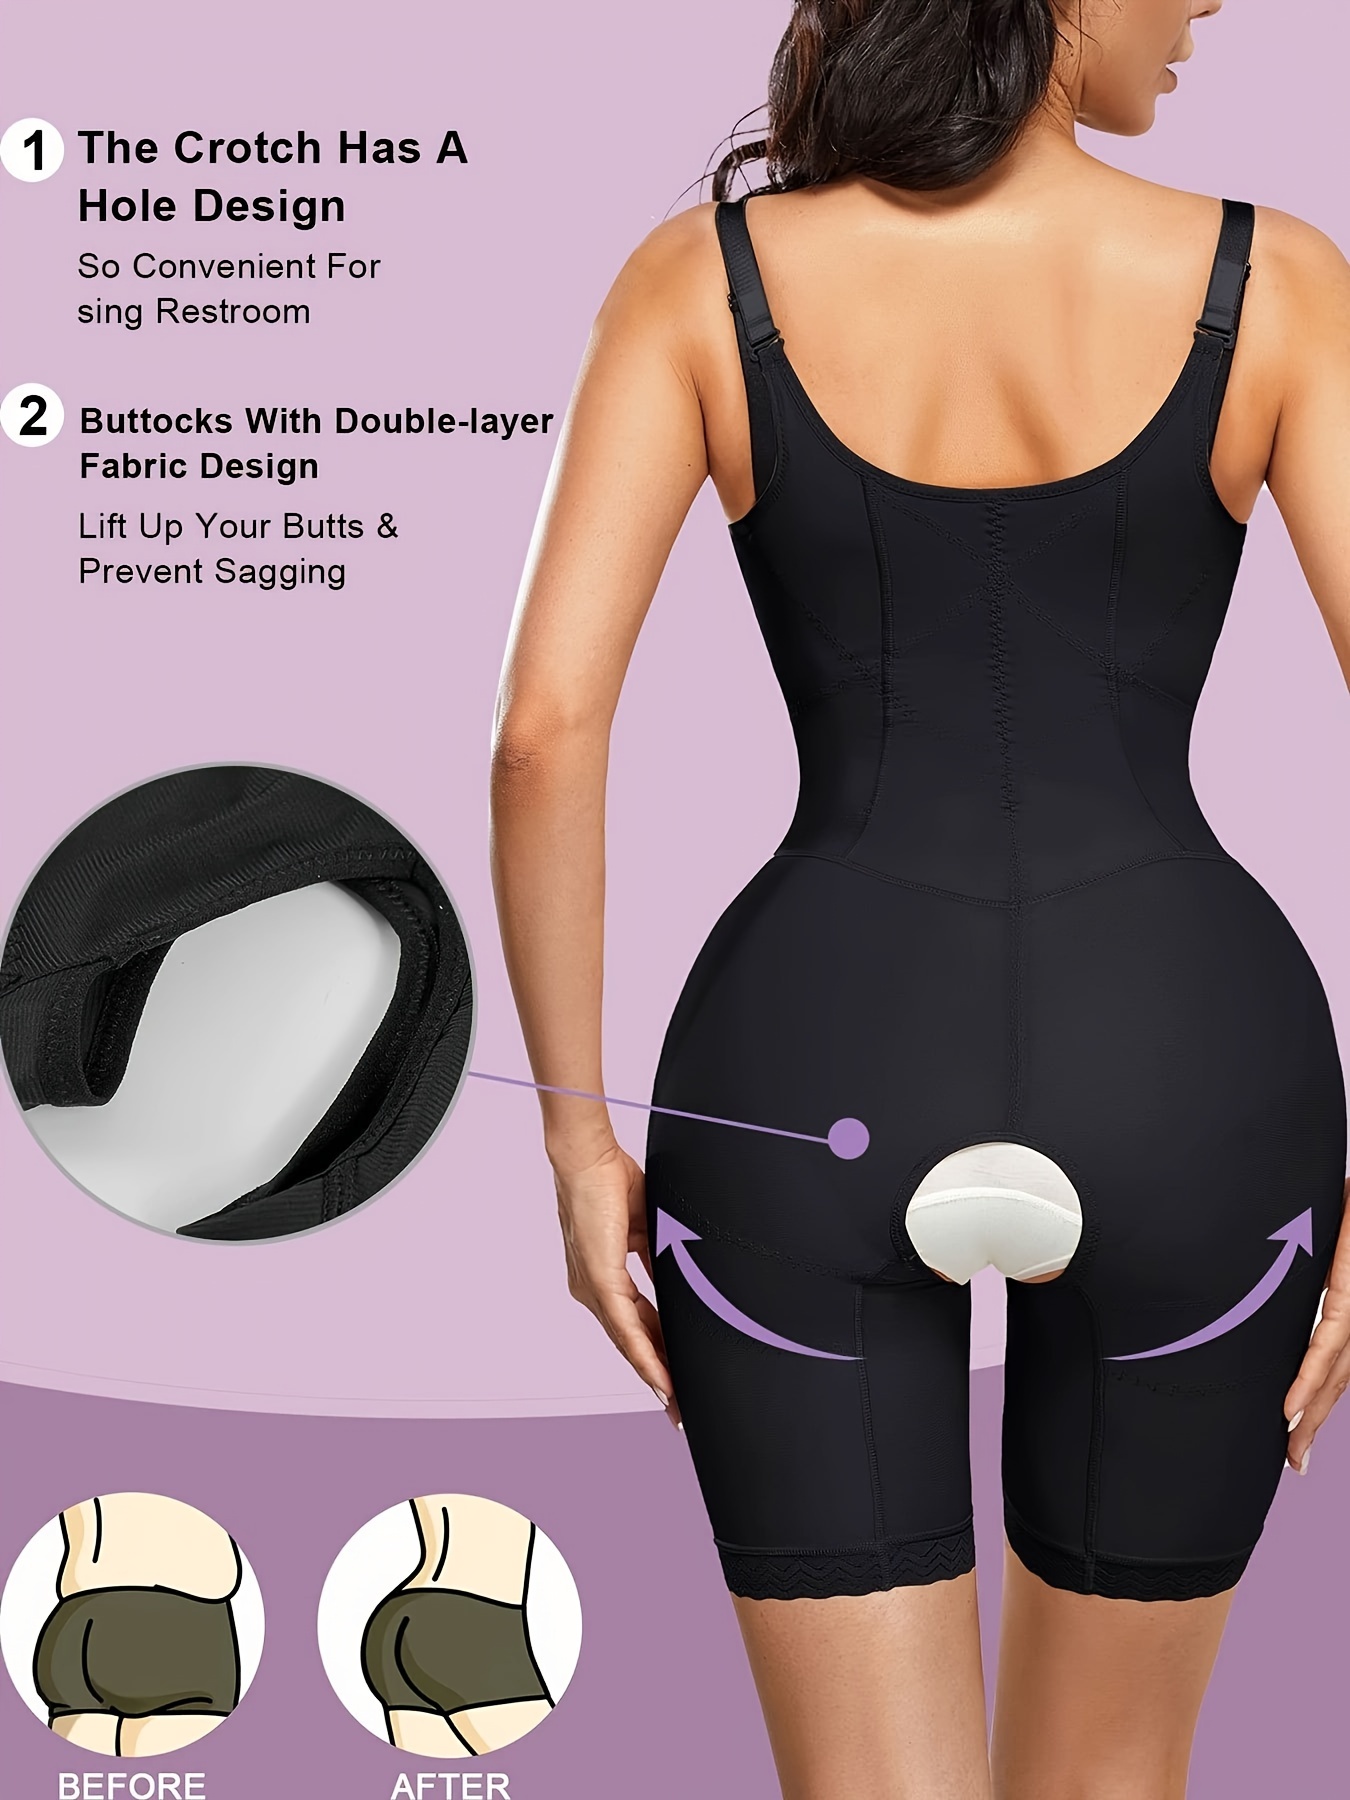 Body Shaper Shapewear With Shoulder Straps, Butt Lifter Control Panties,  Butt Lifter Trainer, Instantly Lifts & Supports Breasts, Waist Trainer